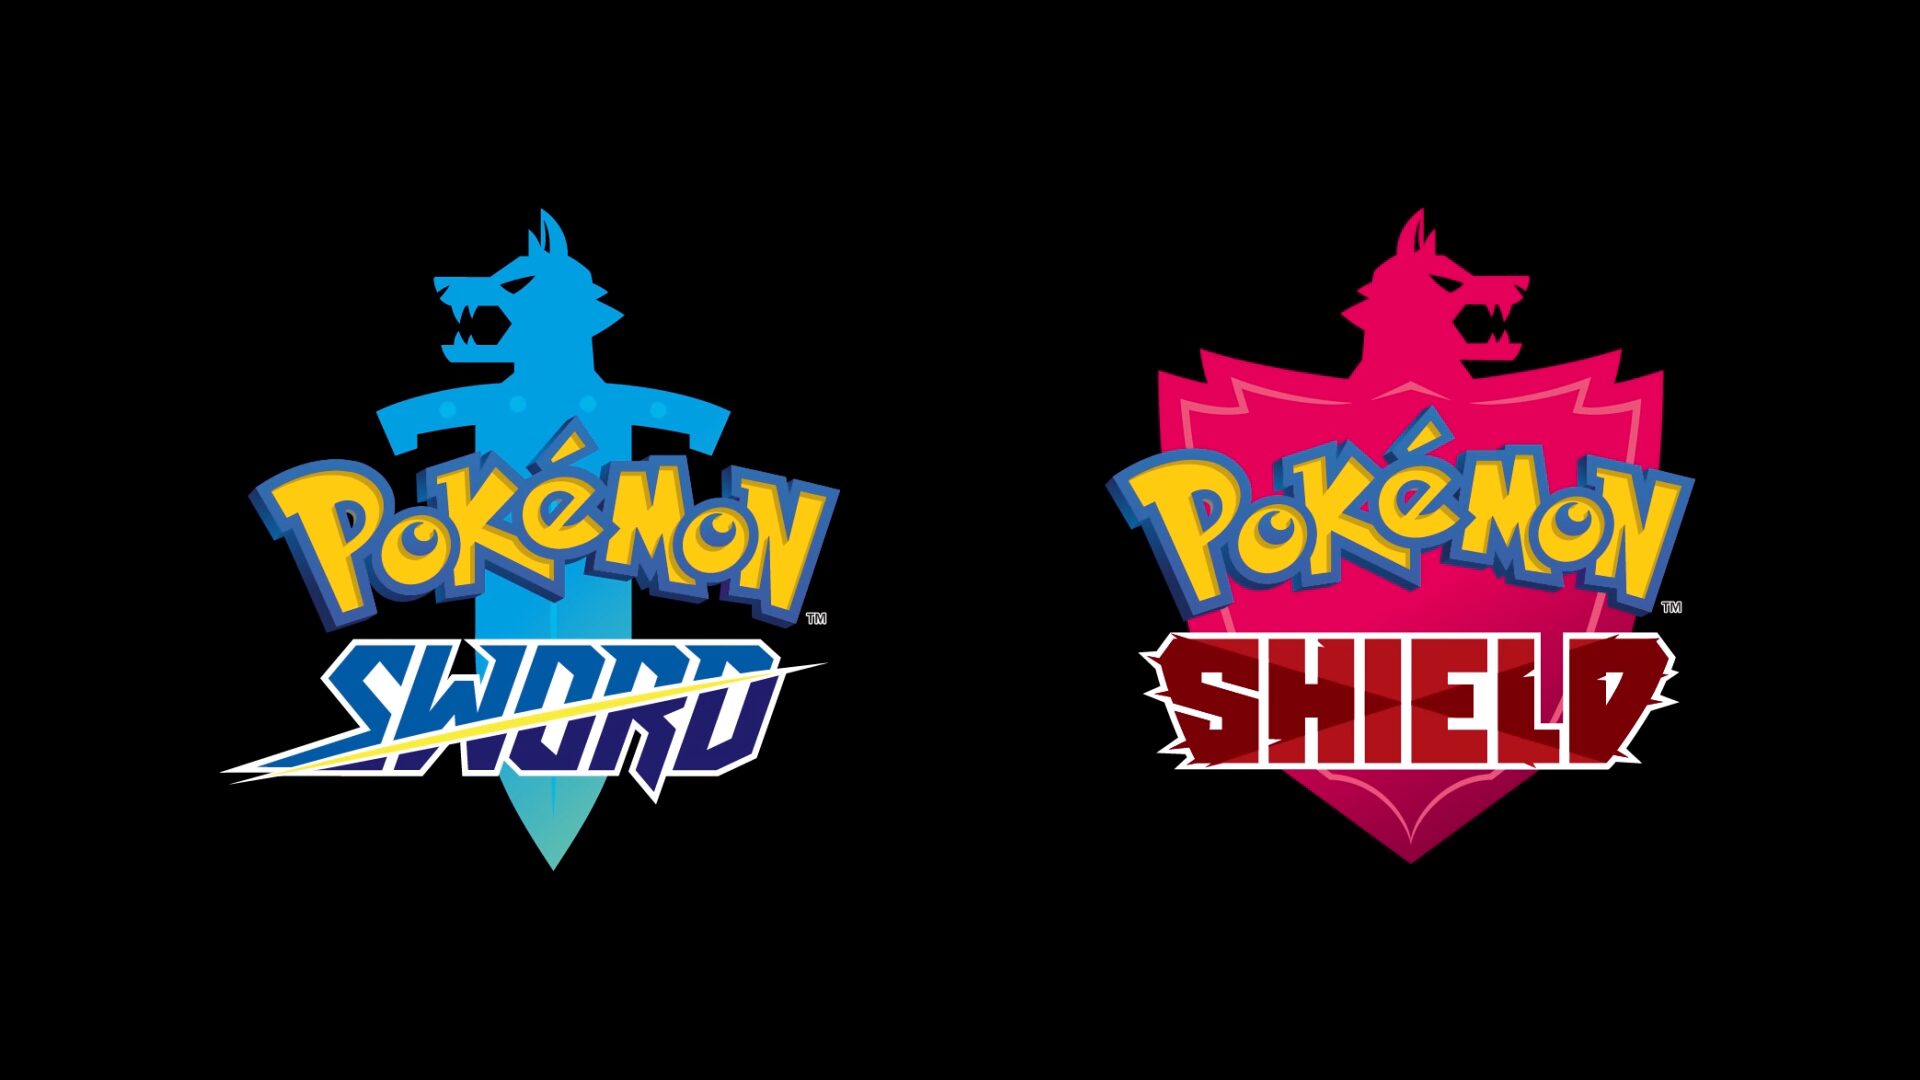 Pokémon Sword And Shield Announced For The Switch